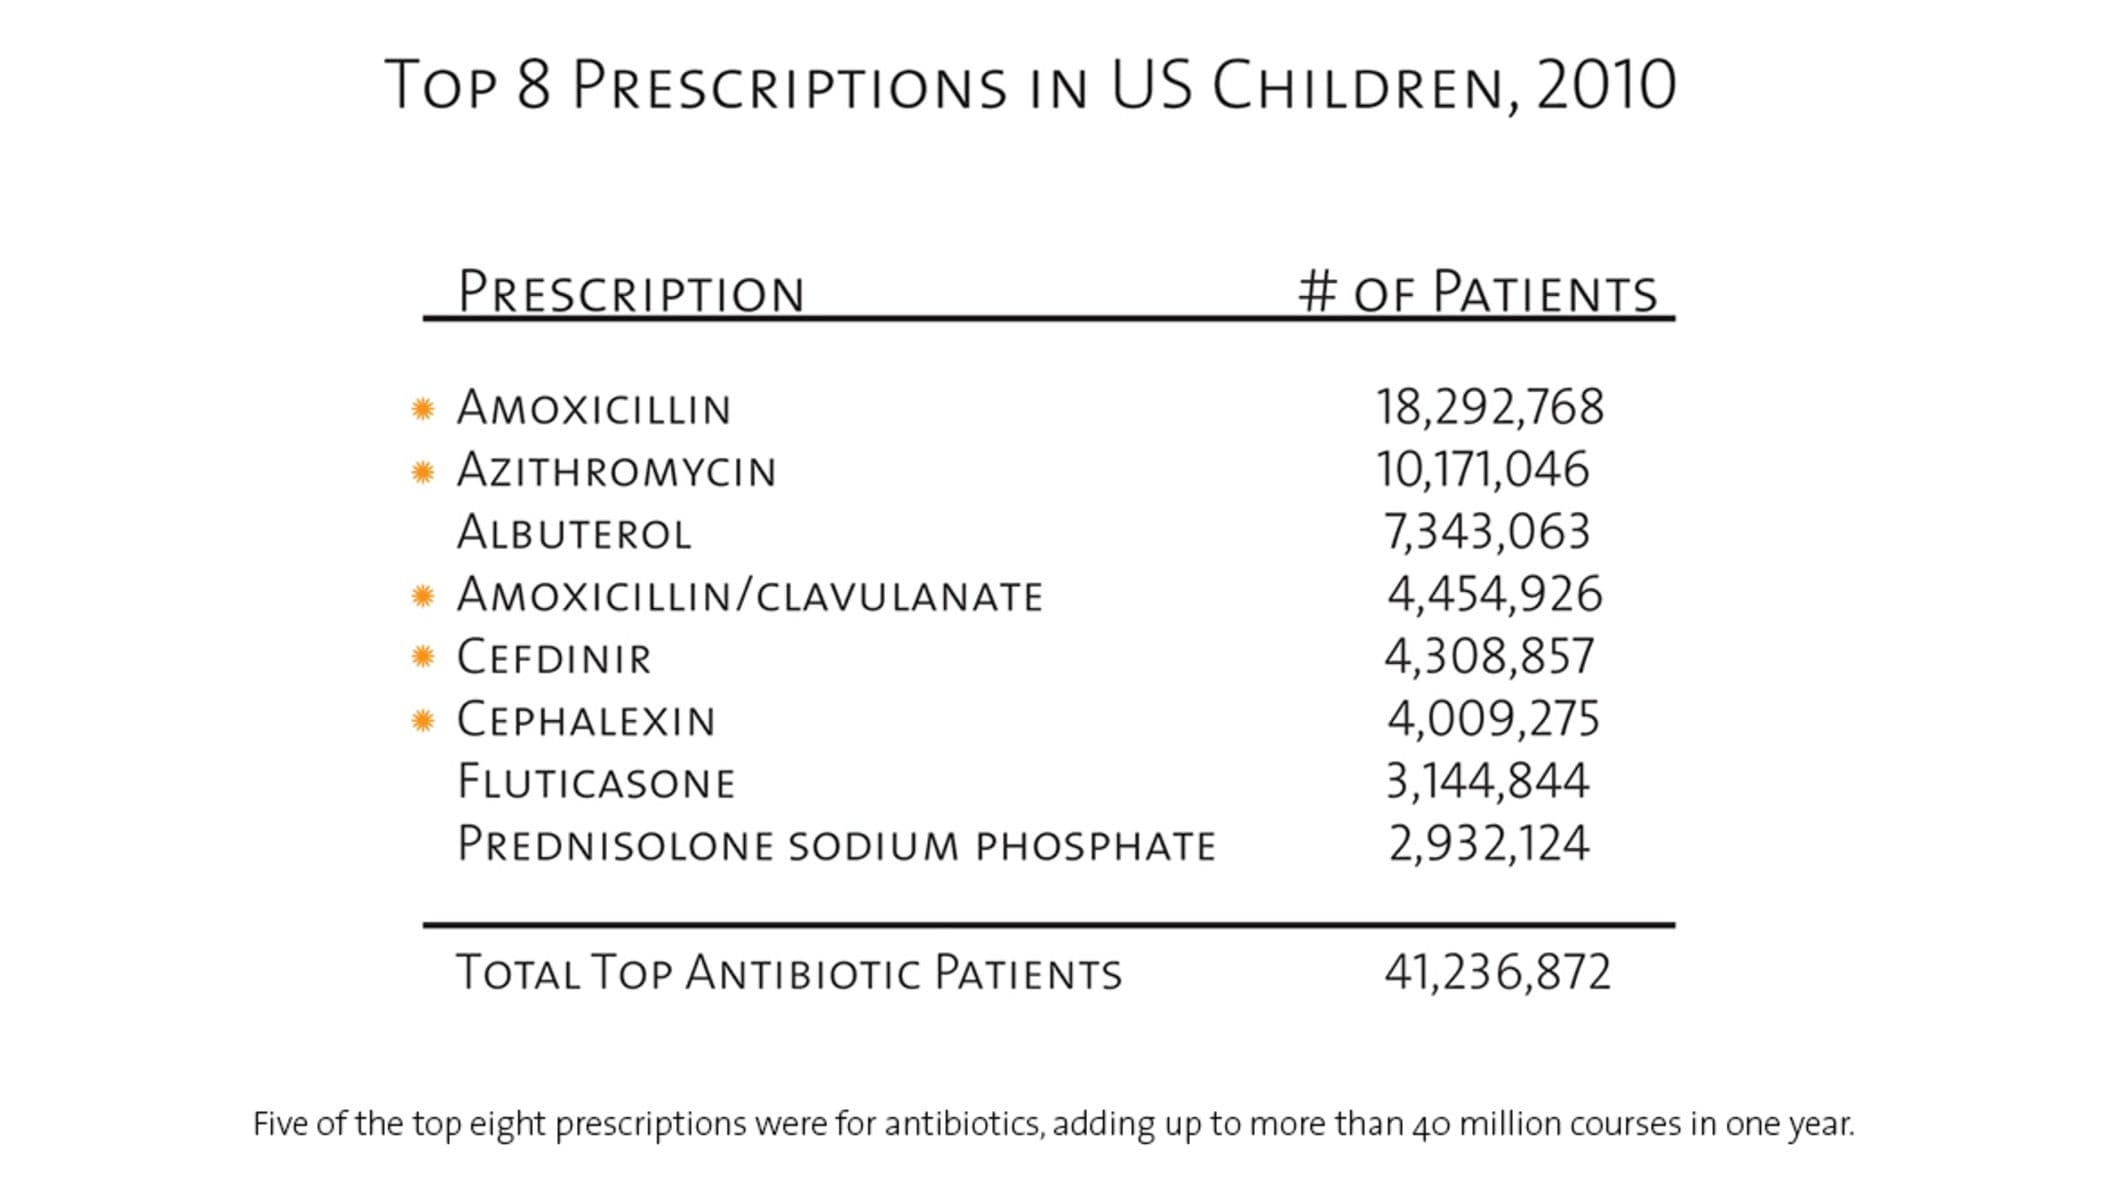 Chart showing that five of the top eight prescriptions for U.S. children in 2010, more than 41 million prescriptions, were for antibiotics.